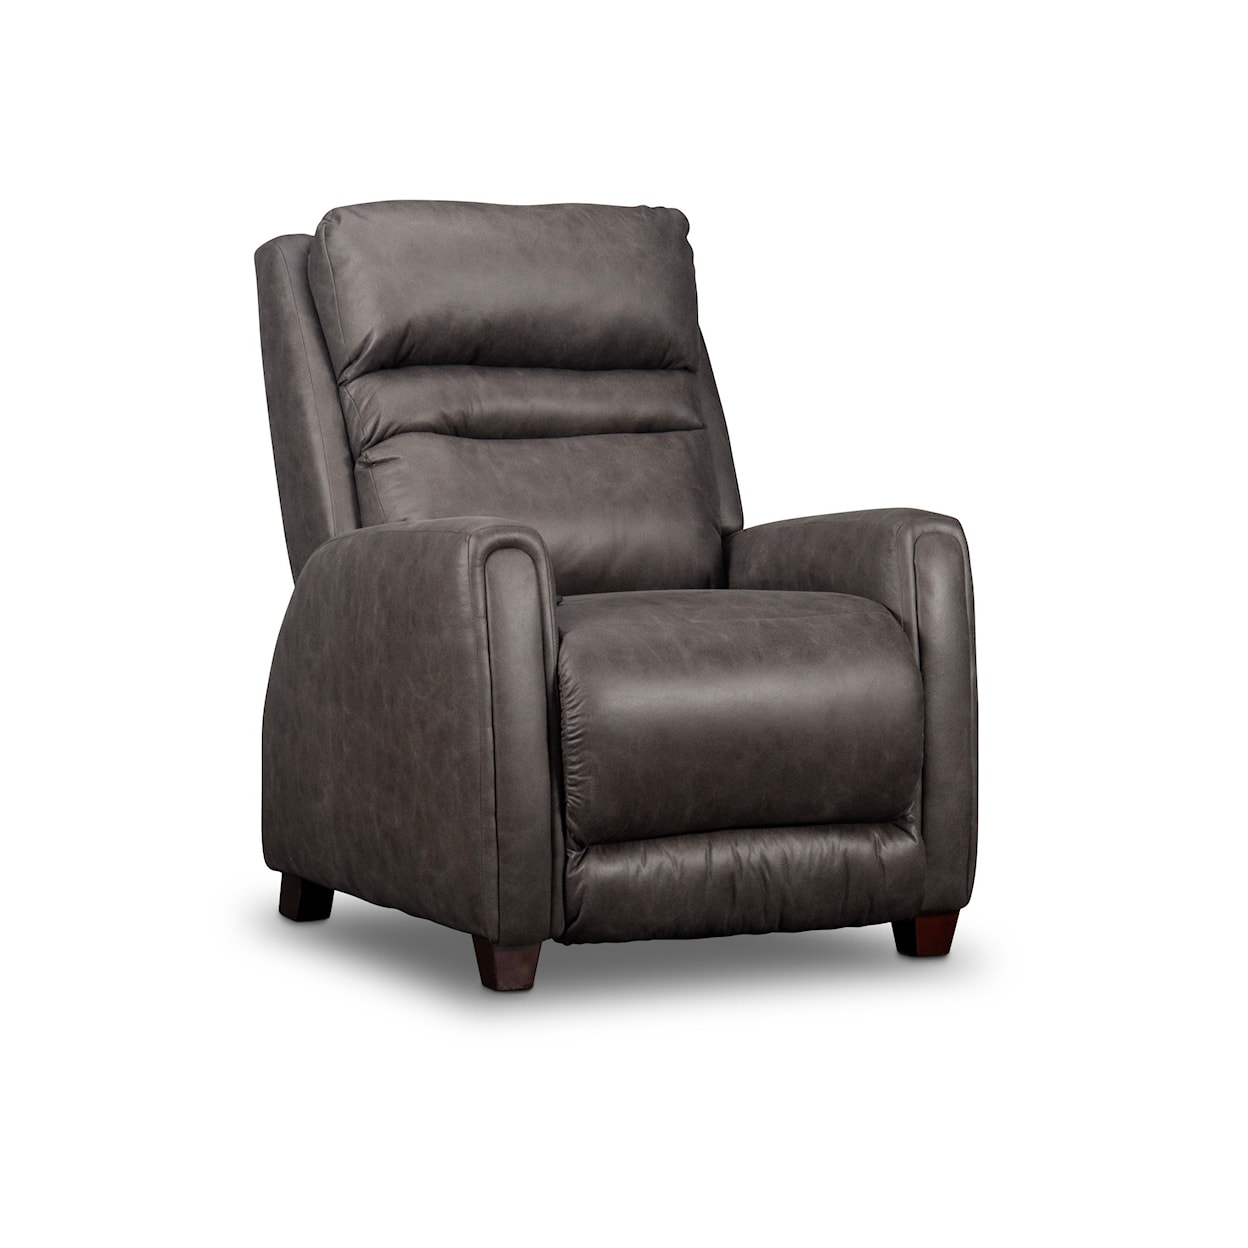 Southern Motion Godric Godric Leather Match Power Recliner